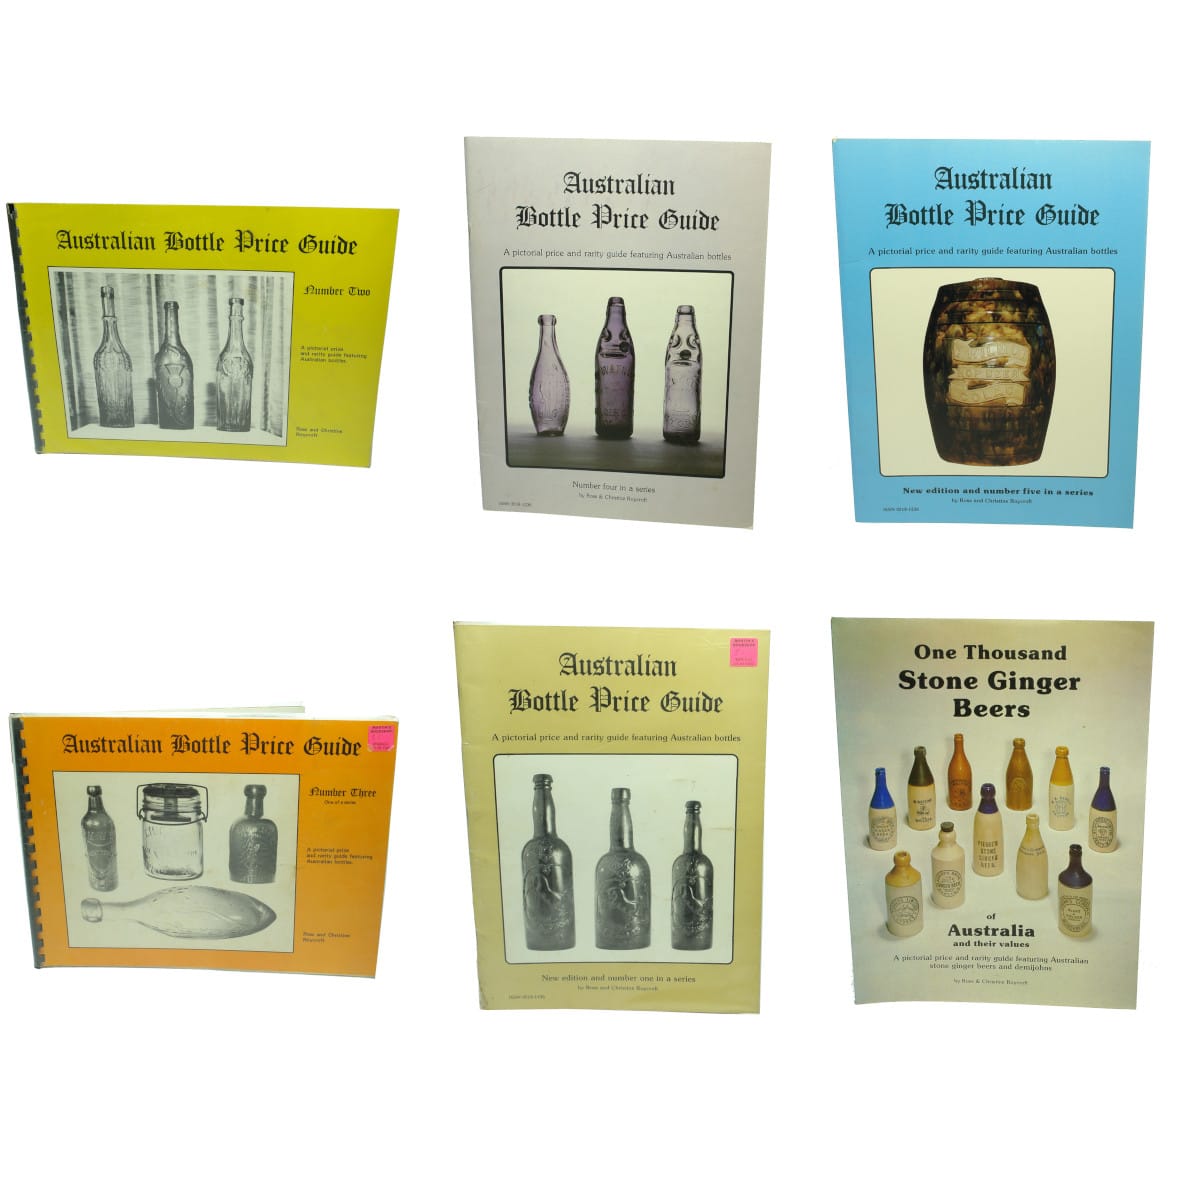 6 Ross & Christine Roycroft Books: 5 editions of Australian Bottle Price Guides; One Thousand Stone Ginger Beers.